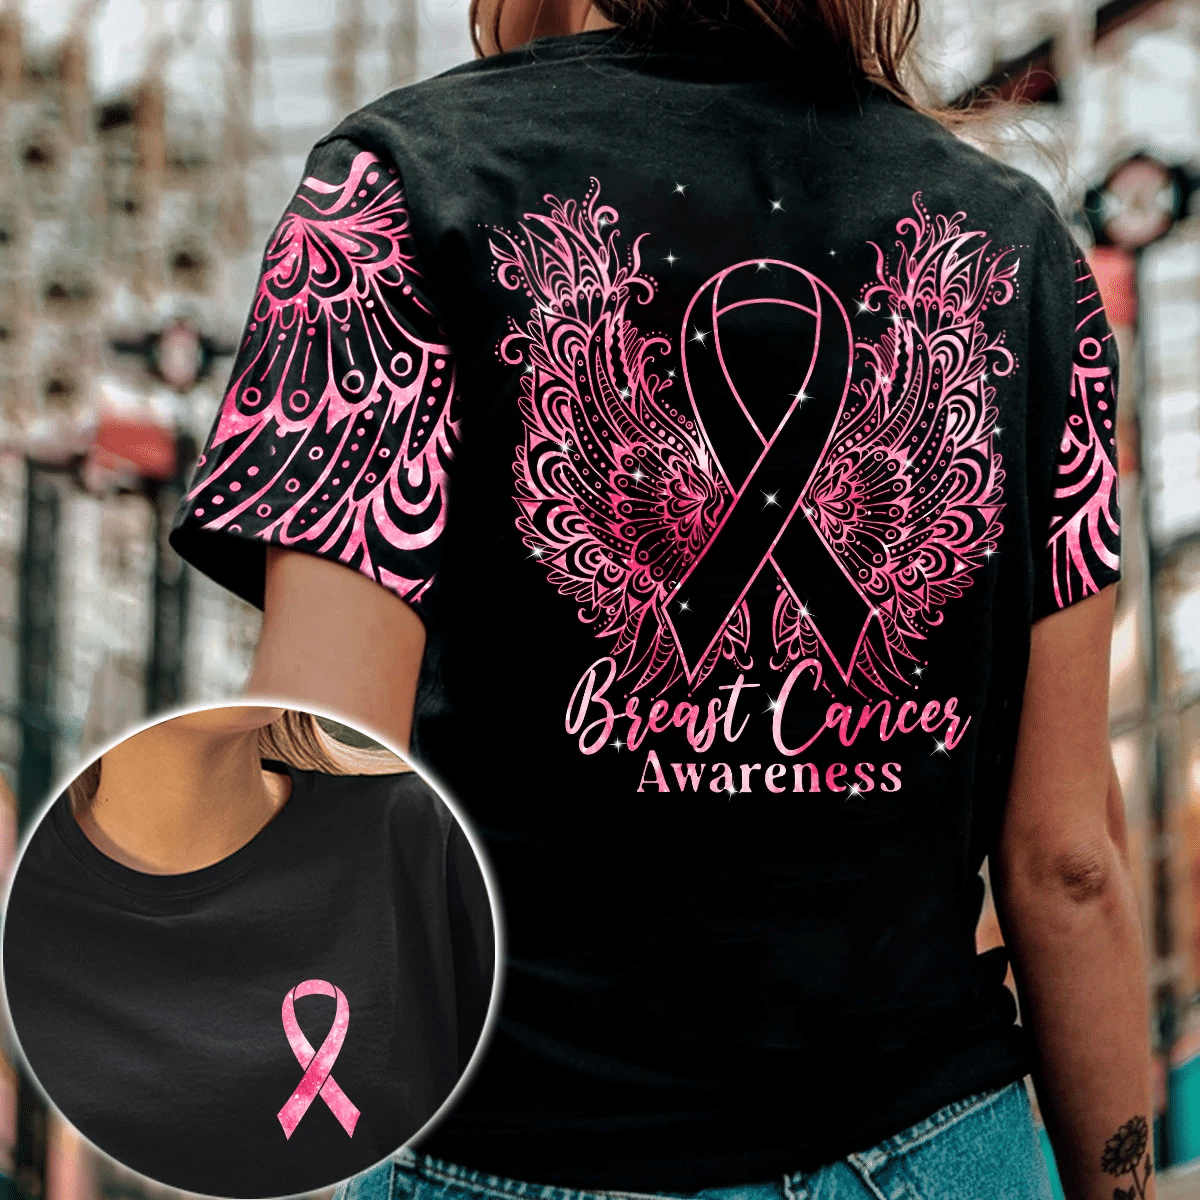 Mandala Breast Cancer Wings - Breast Cancer Awareness All Over T-shirt and Hoodie 0822